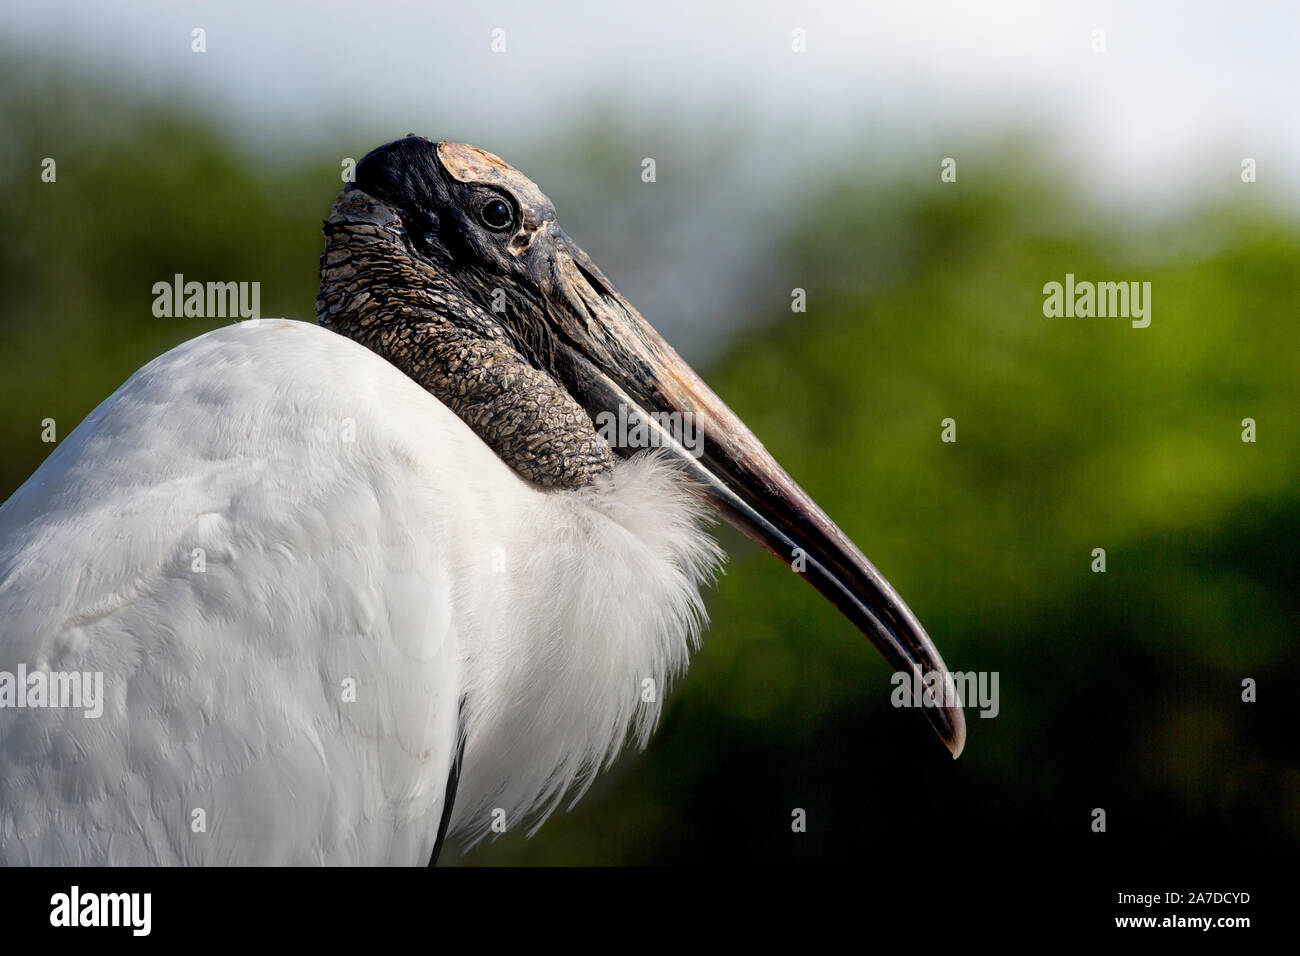 Majestic Adult Wood Stork, Mycteria americana, in profile against a green background Stock Photo